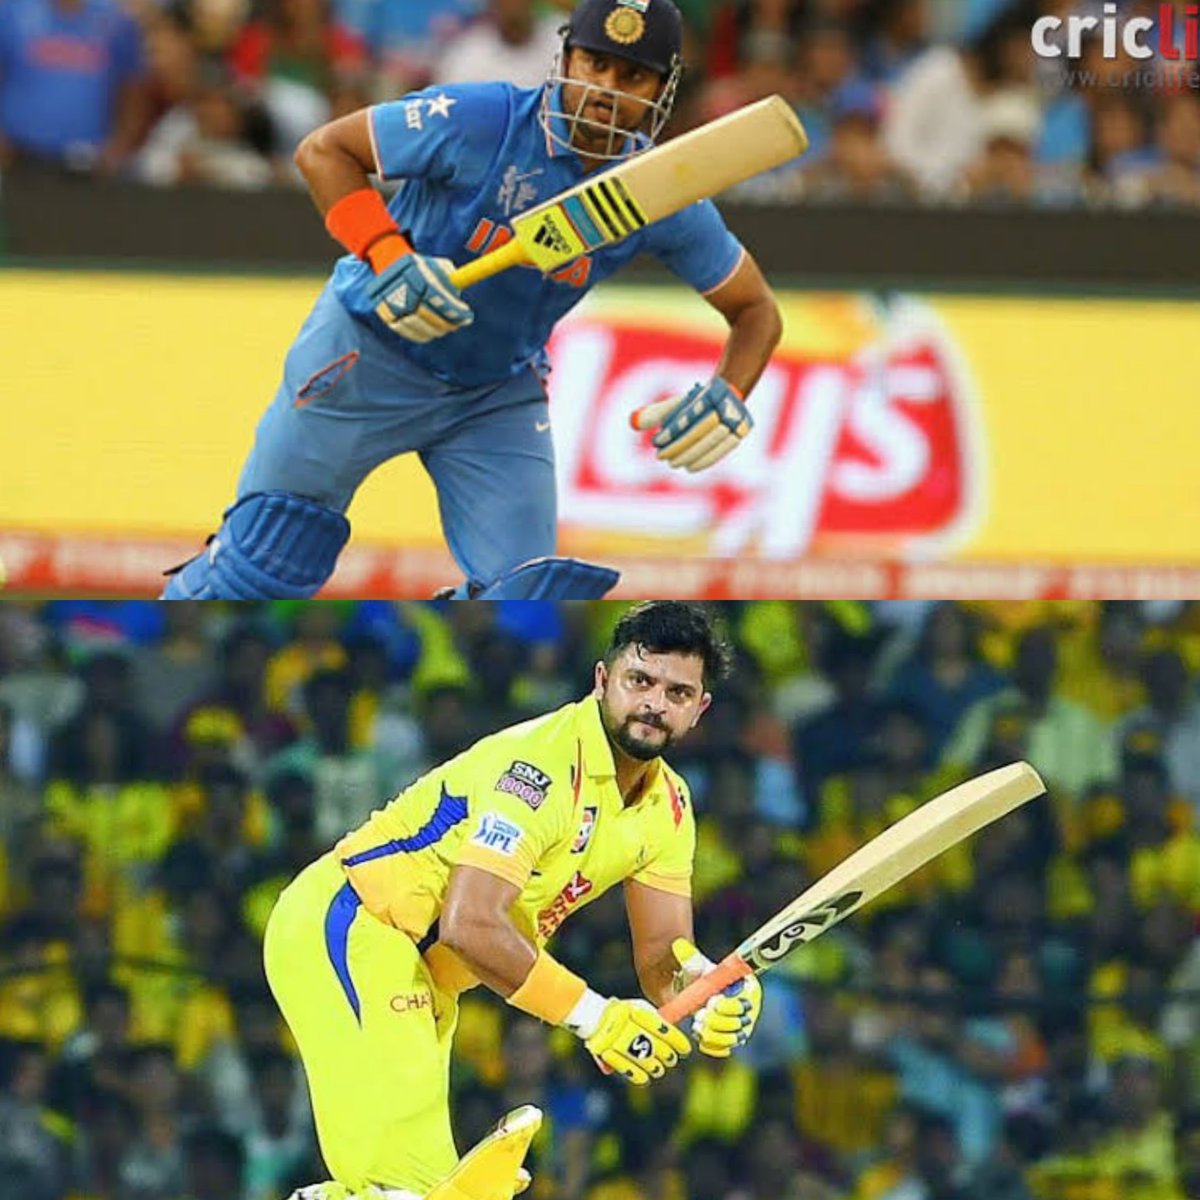 A few coincidence pics of  @ImRaina In blue & in yellowFollow this thread (Don't forget to share ur views)